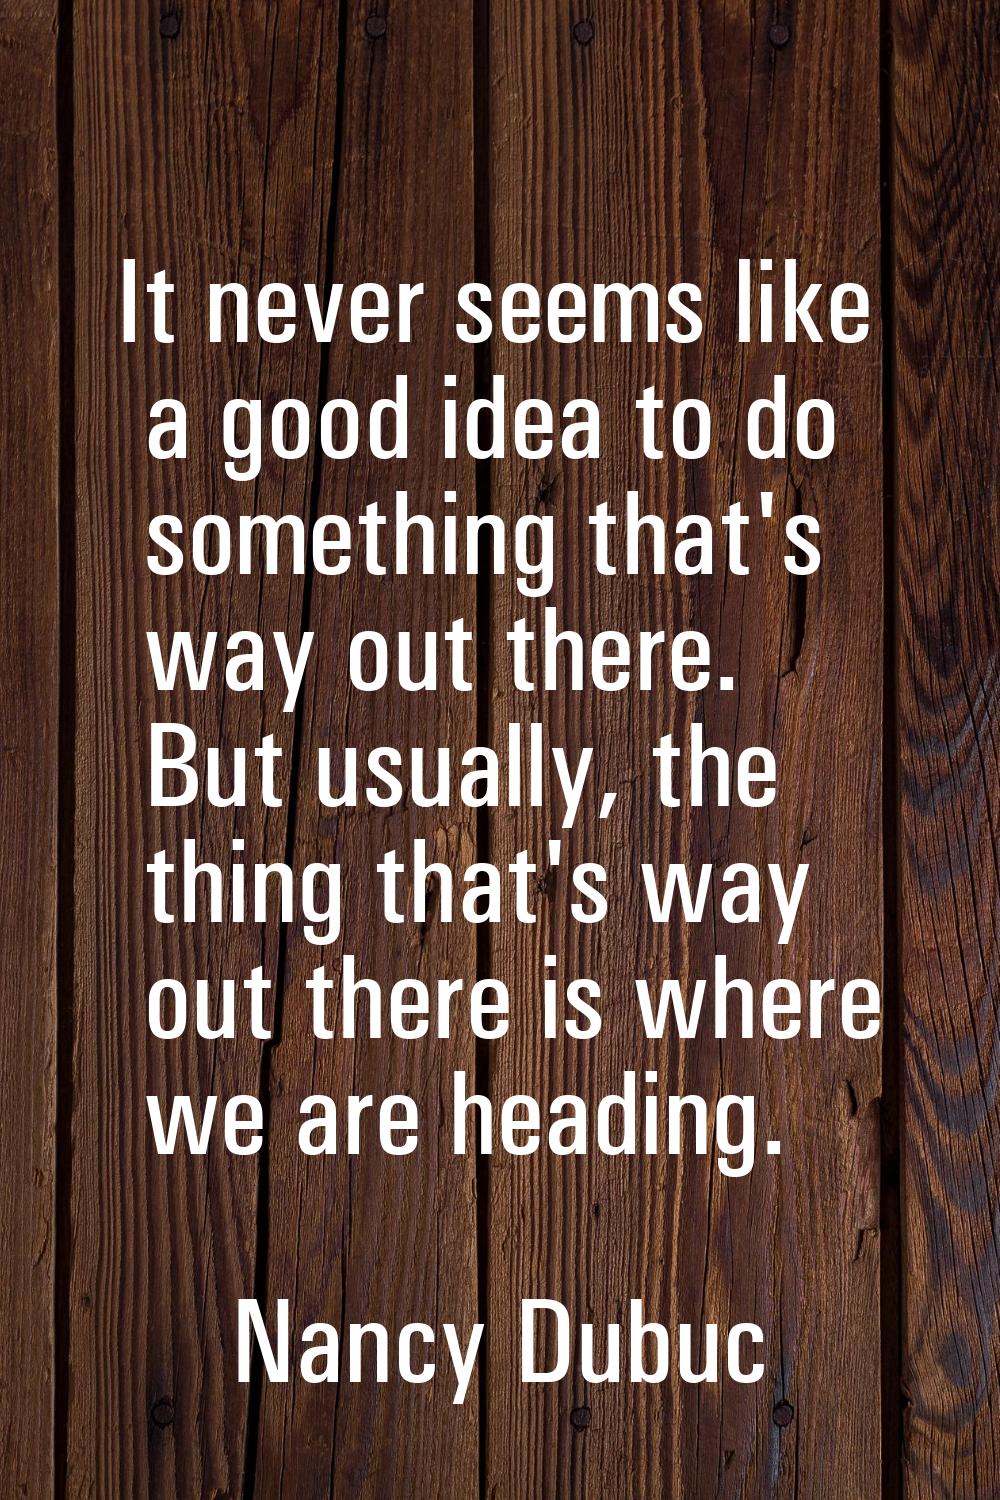 It never seems like a good idea to do something that's way out there. But usually, the thing that's